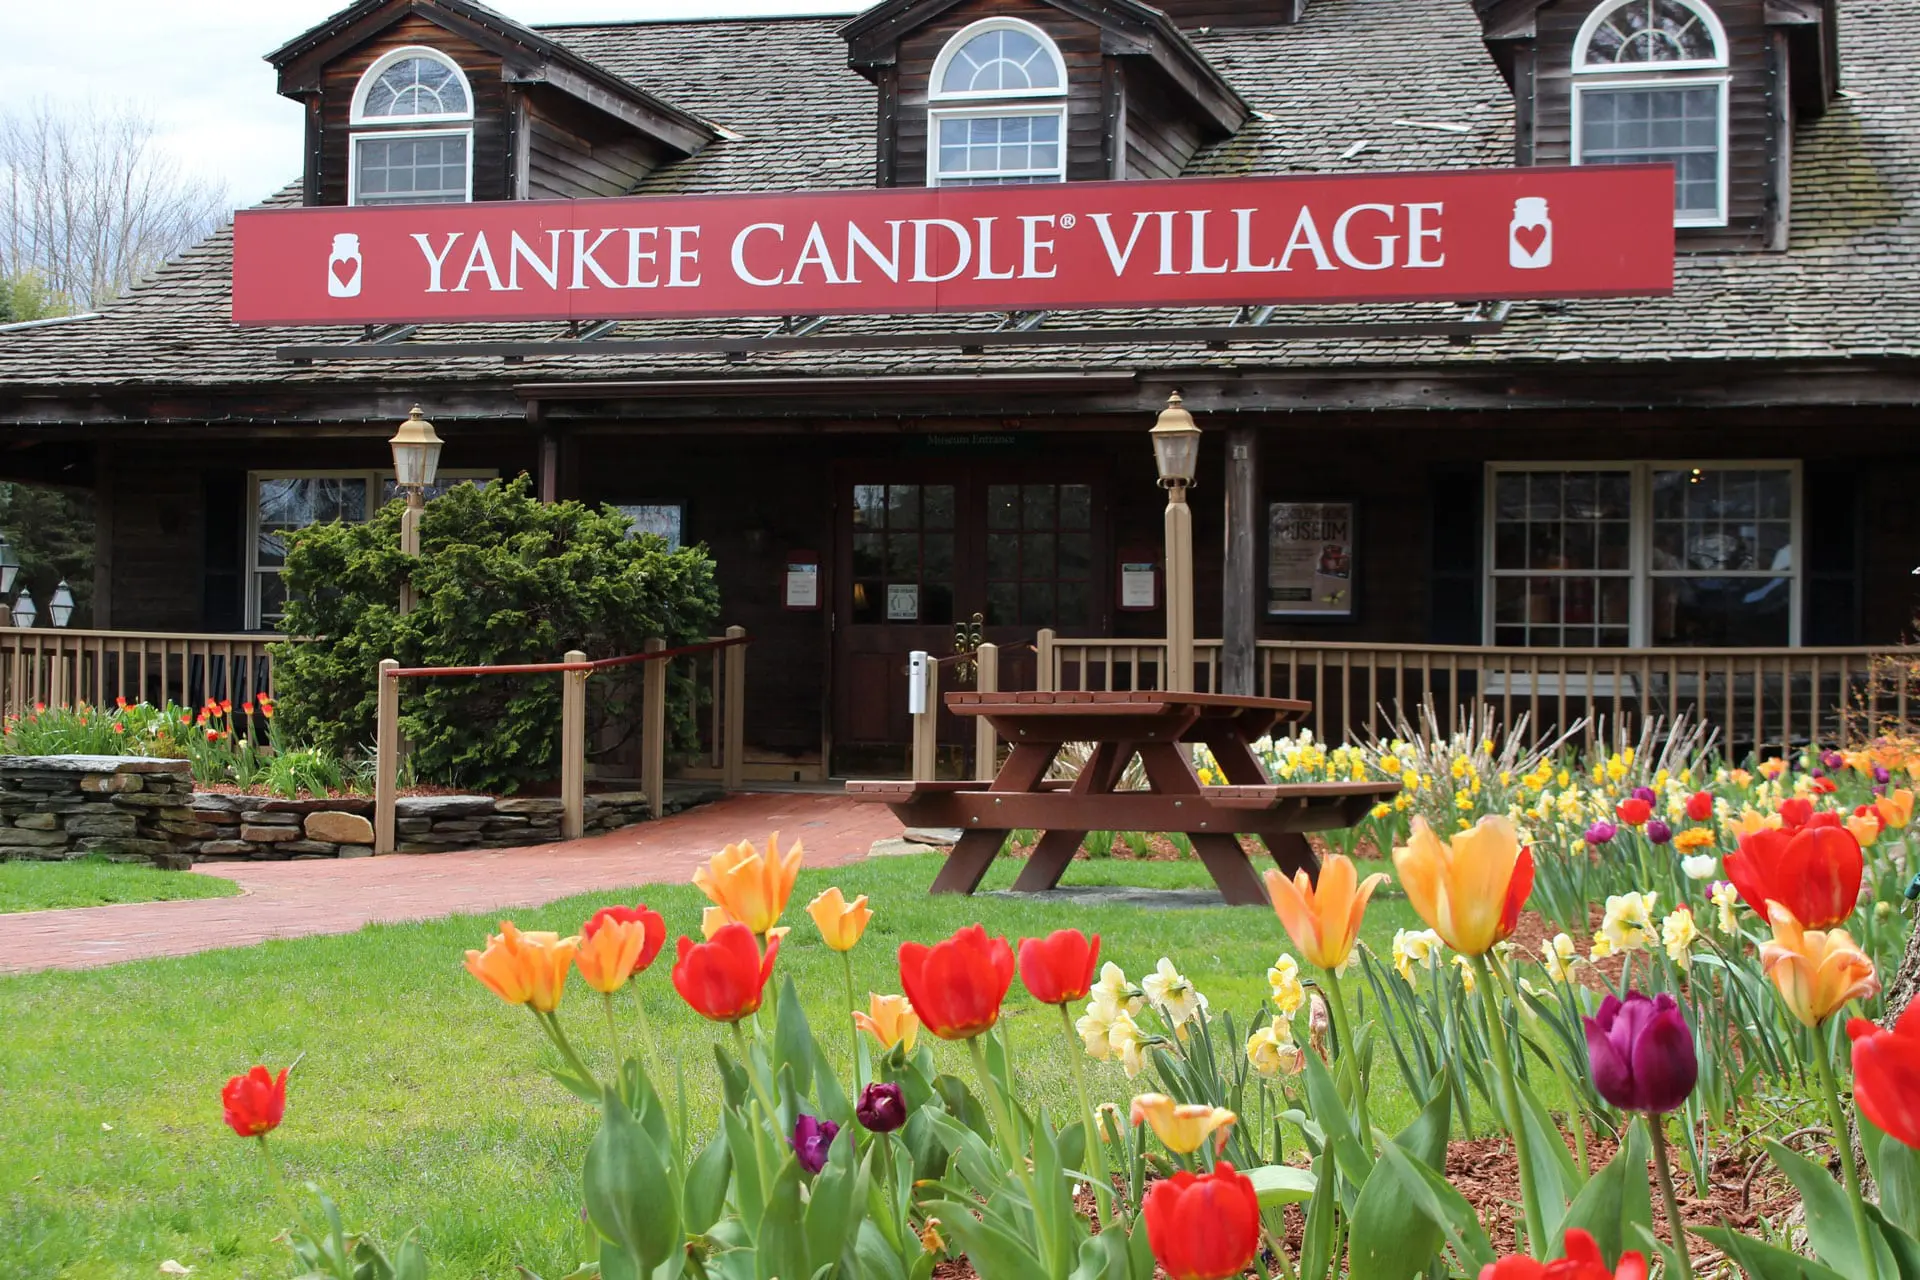 Exterior of Yankee Candle Village with tulips in bloom